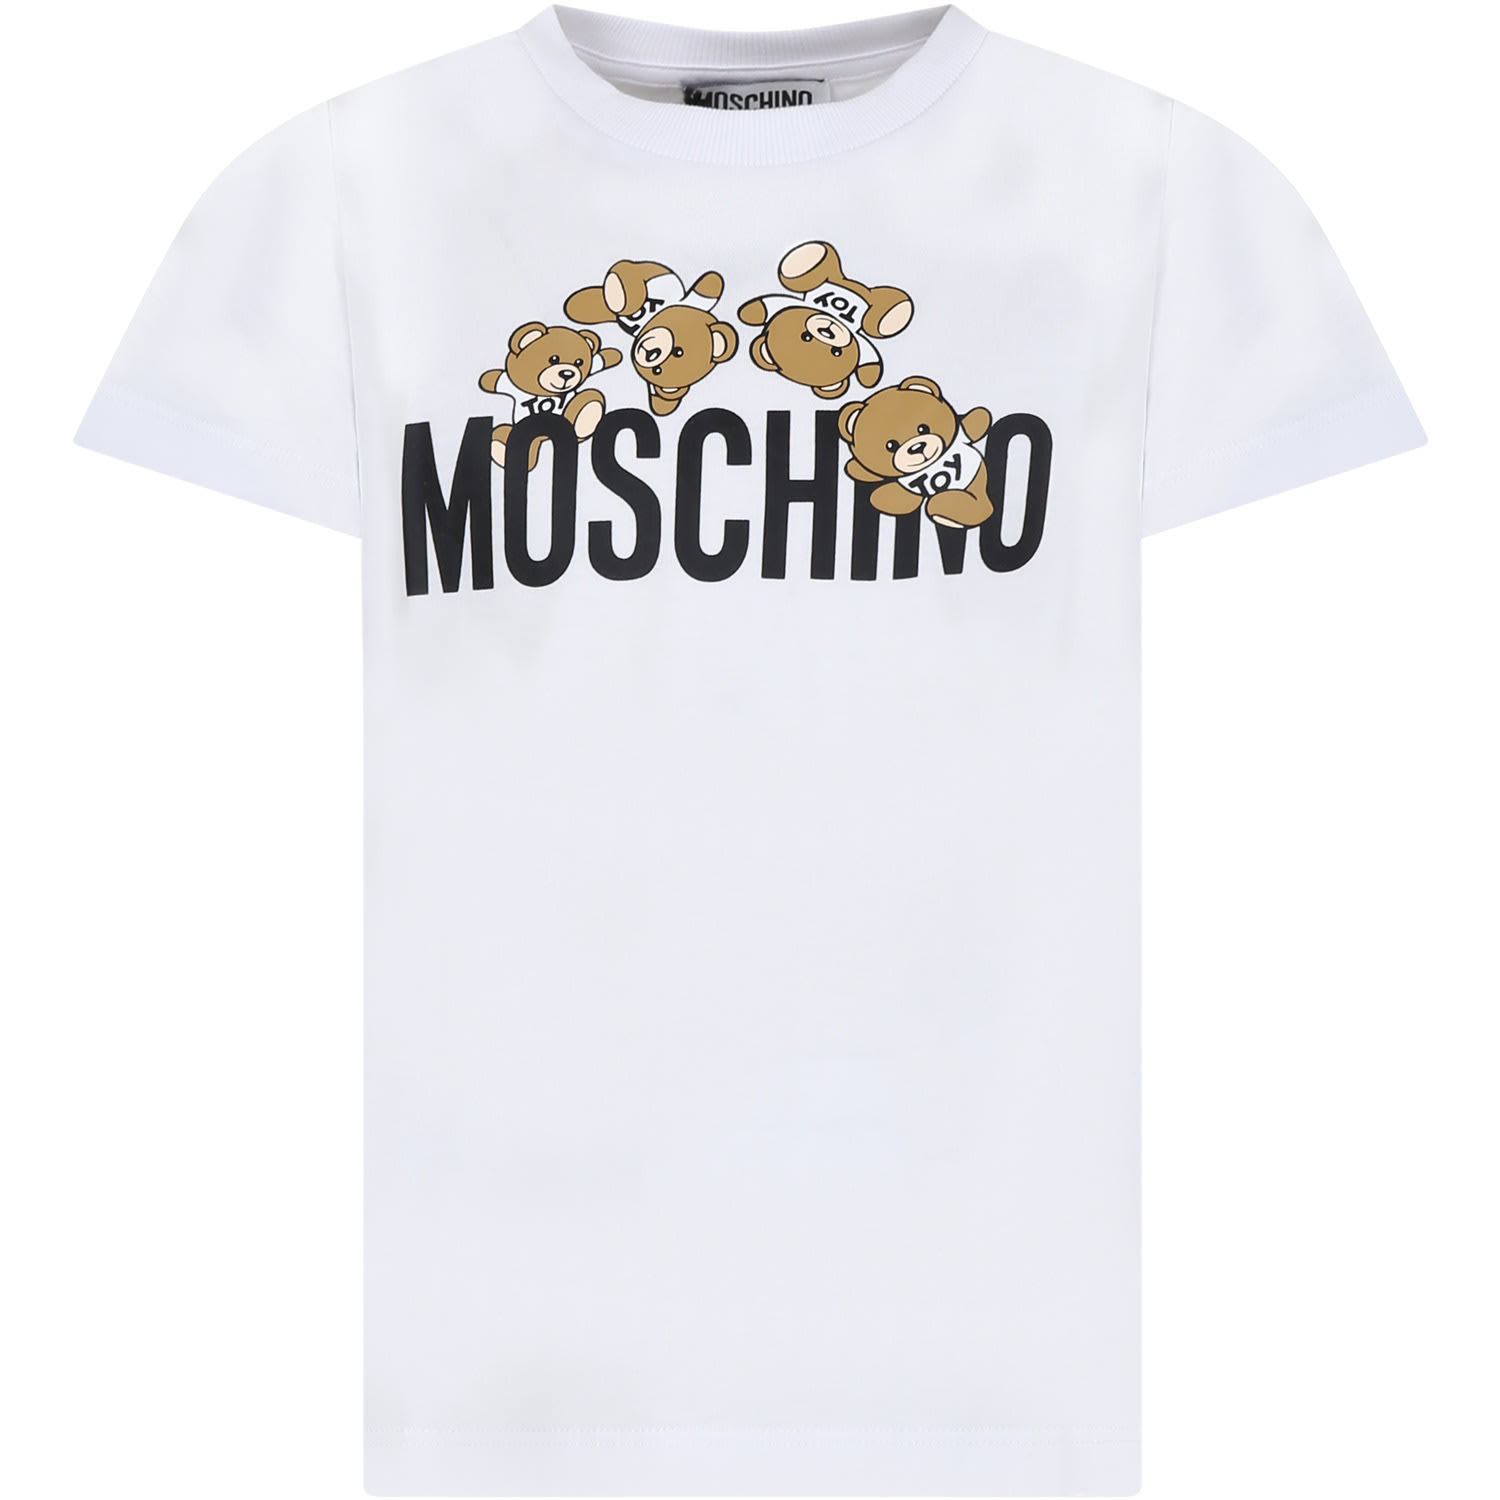 Moschino White T-shirt For Kids With Logo And Teddy Bear